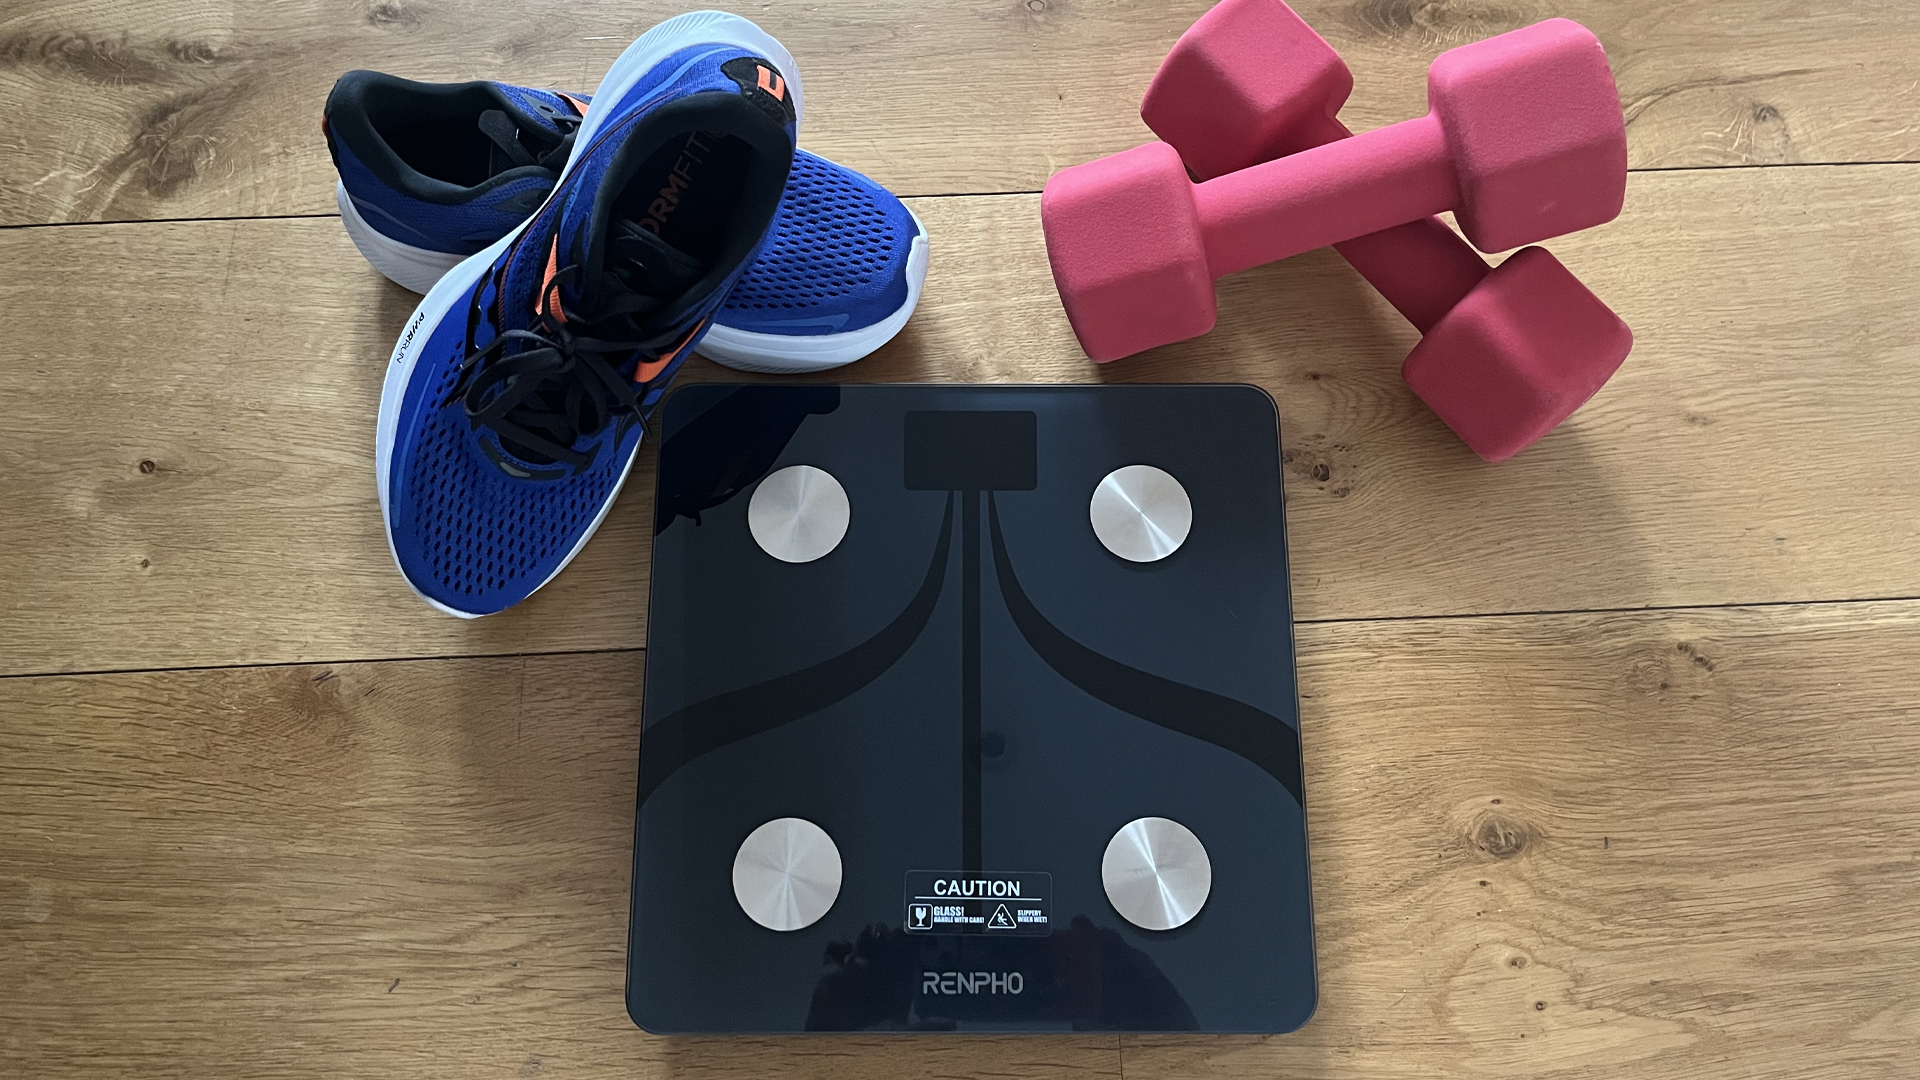 Renpho smart scale being tested by Live Science contributor Maddy Bidulph